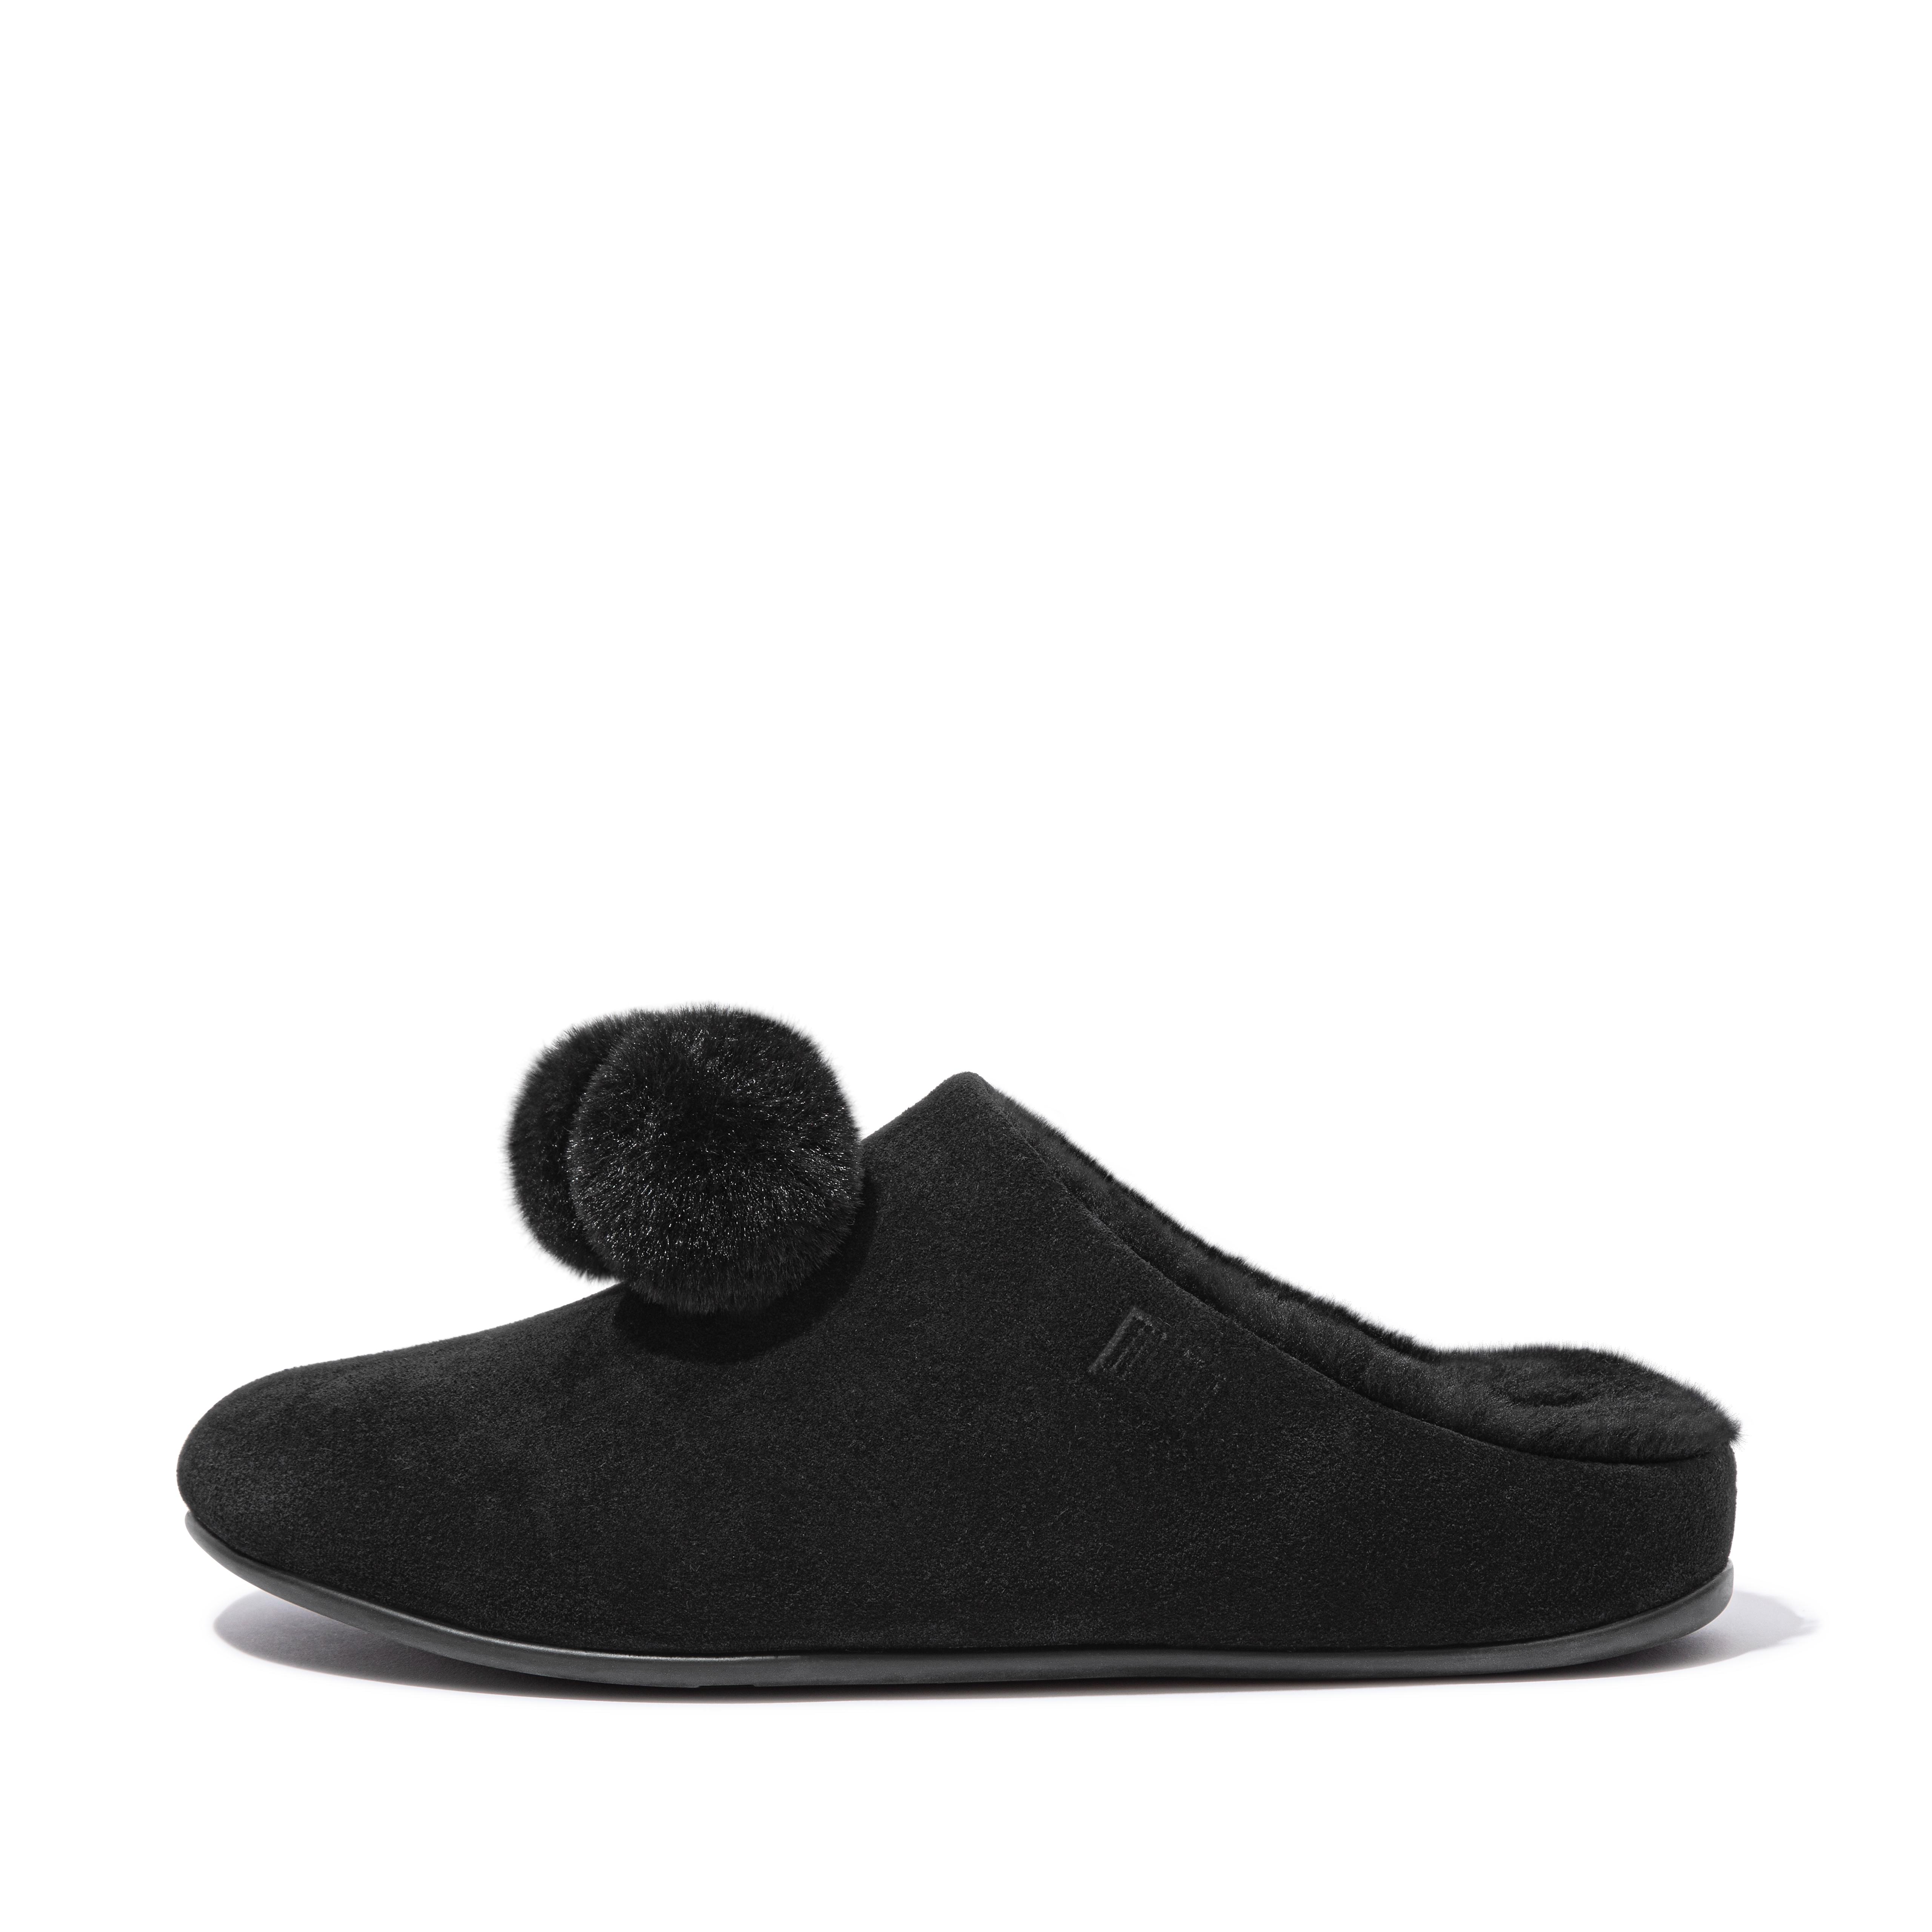 comfy slippers uk